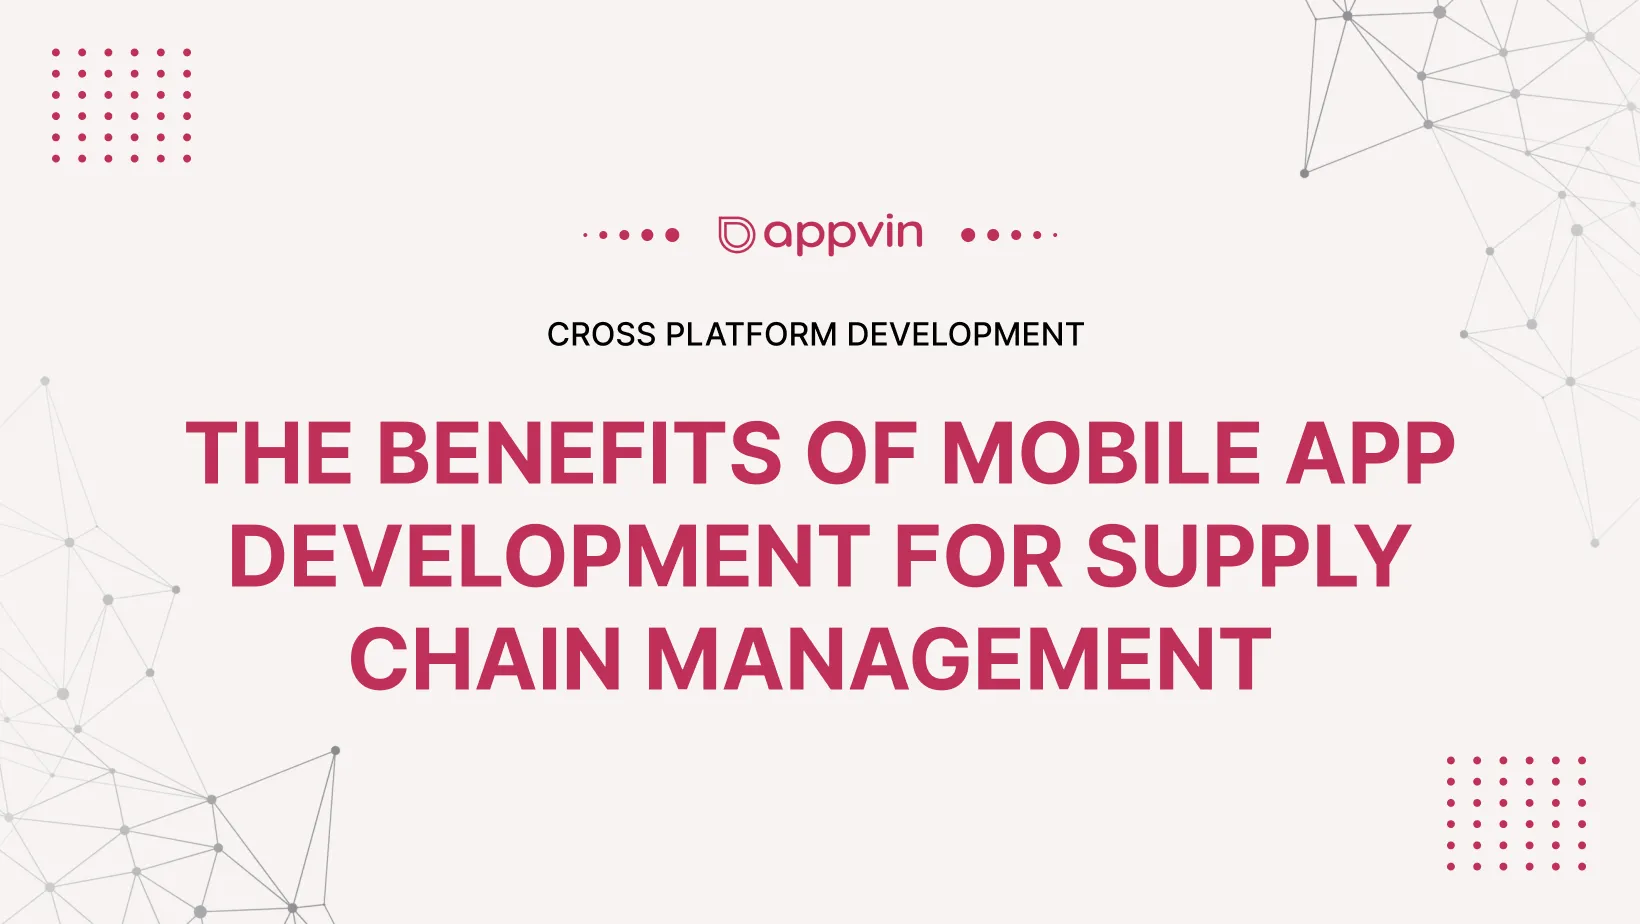 The benefits of mobile app development for supply chain management | AppVin Technologies